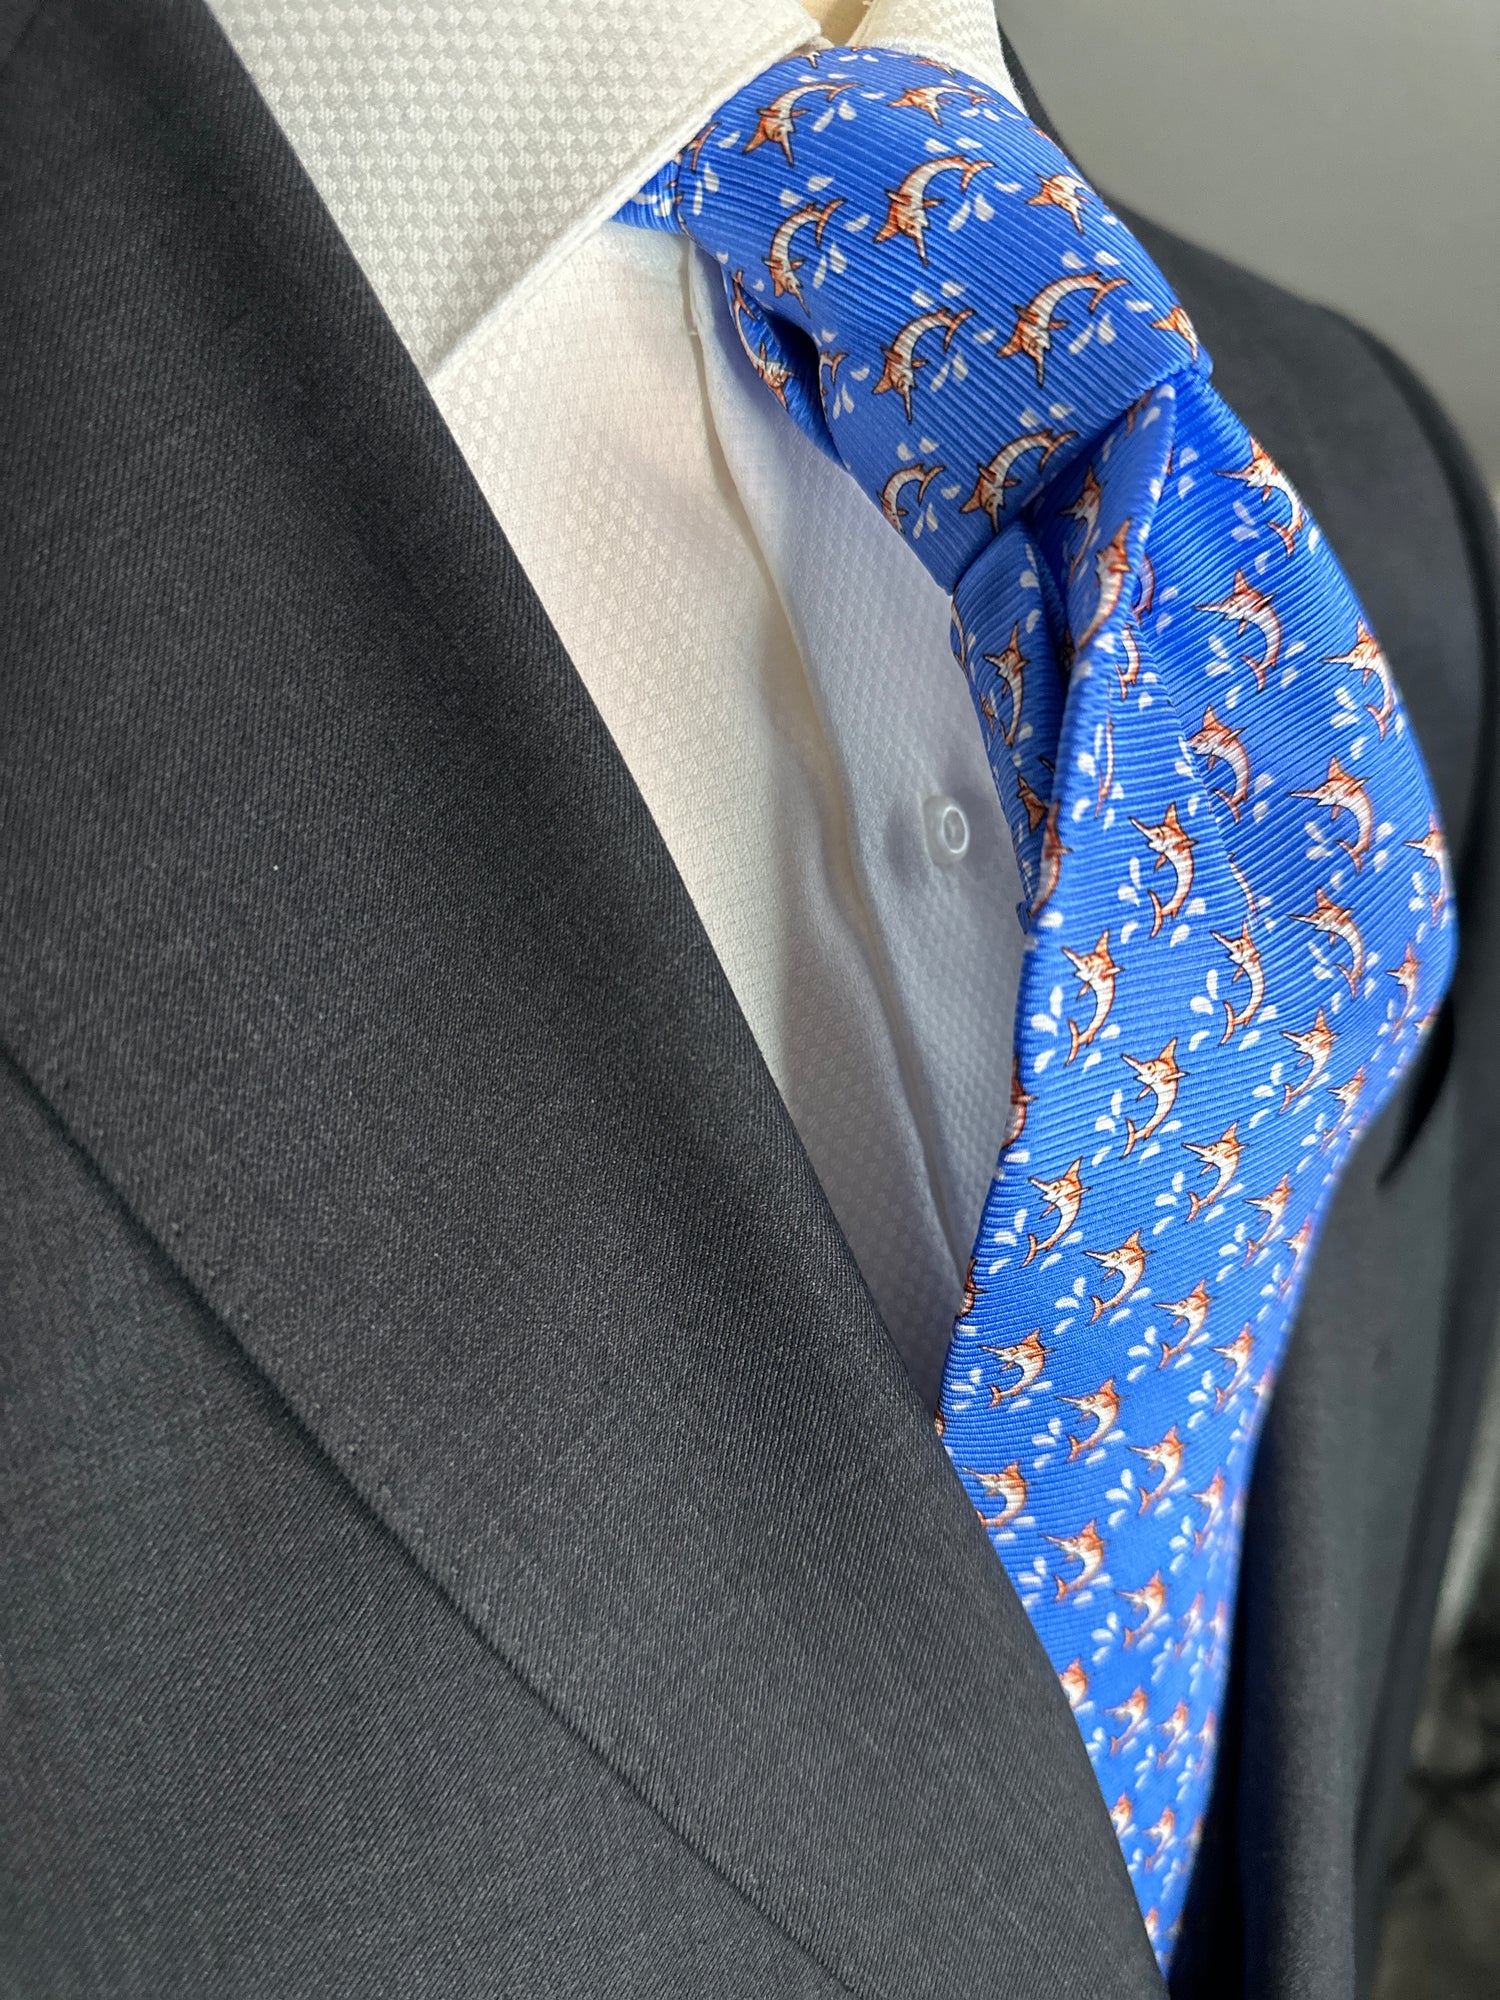 This beautiful 100% silk twill necktie features the swordfish motif with small splashes of water. Being a geometric type pattern, this tie is most interesting because people tend to look twice to realize that the pattern is made up of orange/tan swordfish. Hermes style..